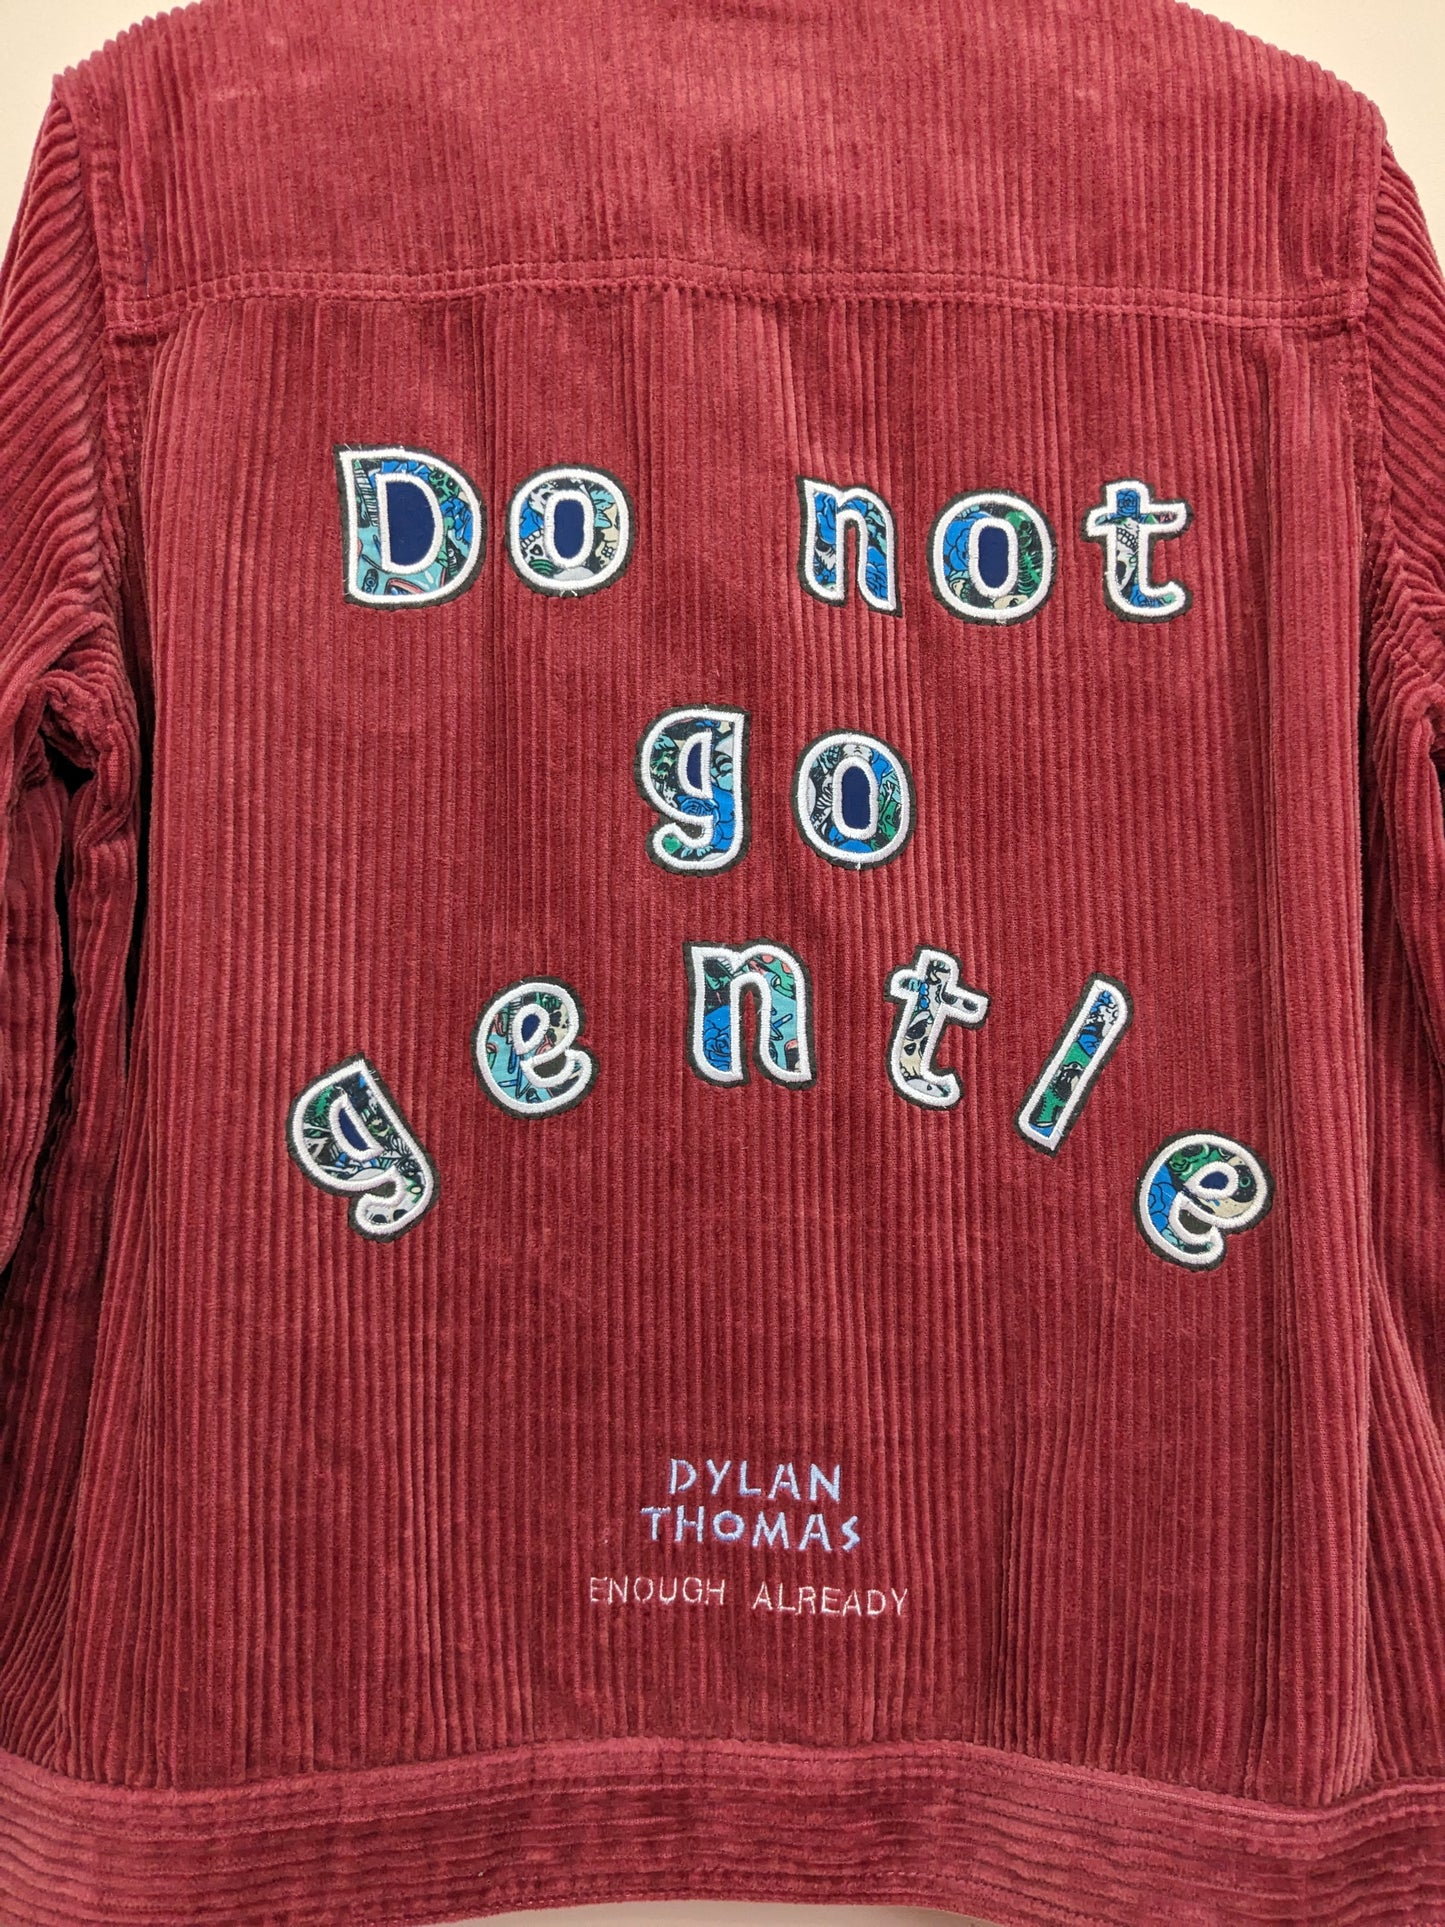 Size 14 Reworked Corduroy Jacket - Hand Sewn Applique - Do Not Go Gentle by Dylan Thomas